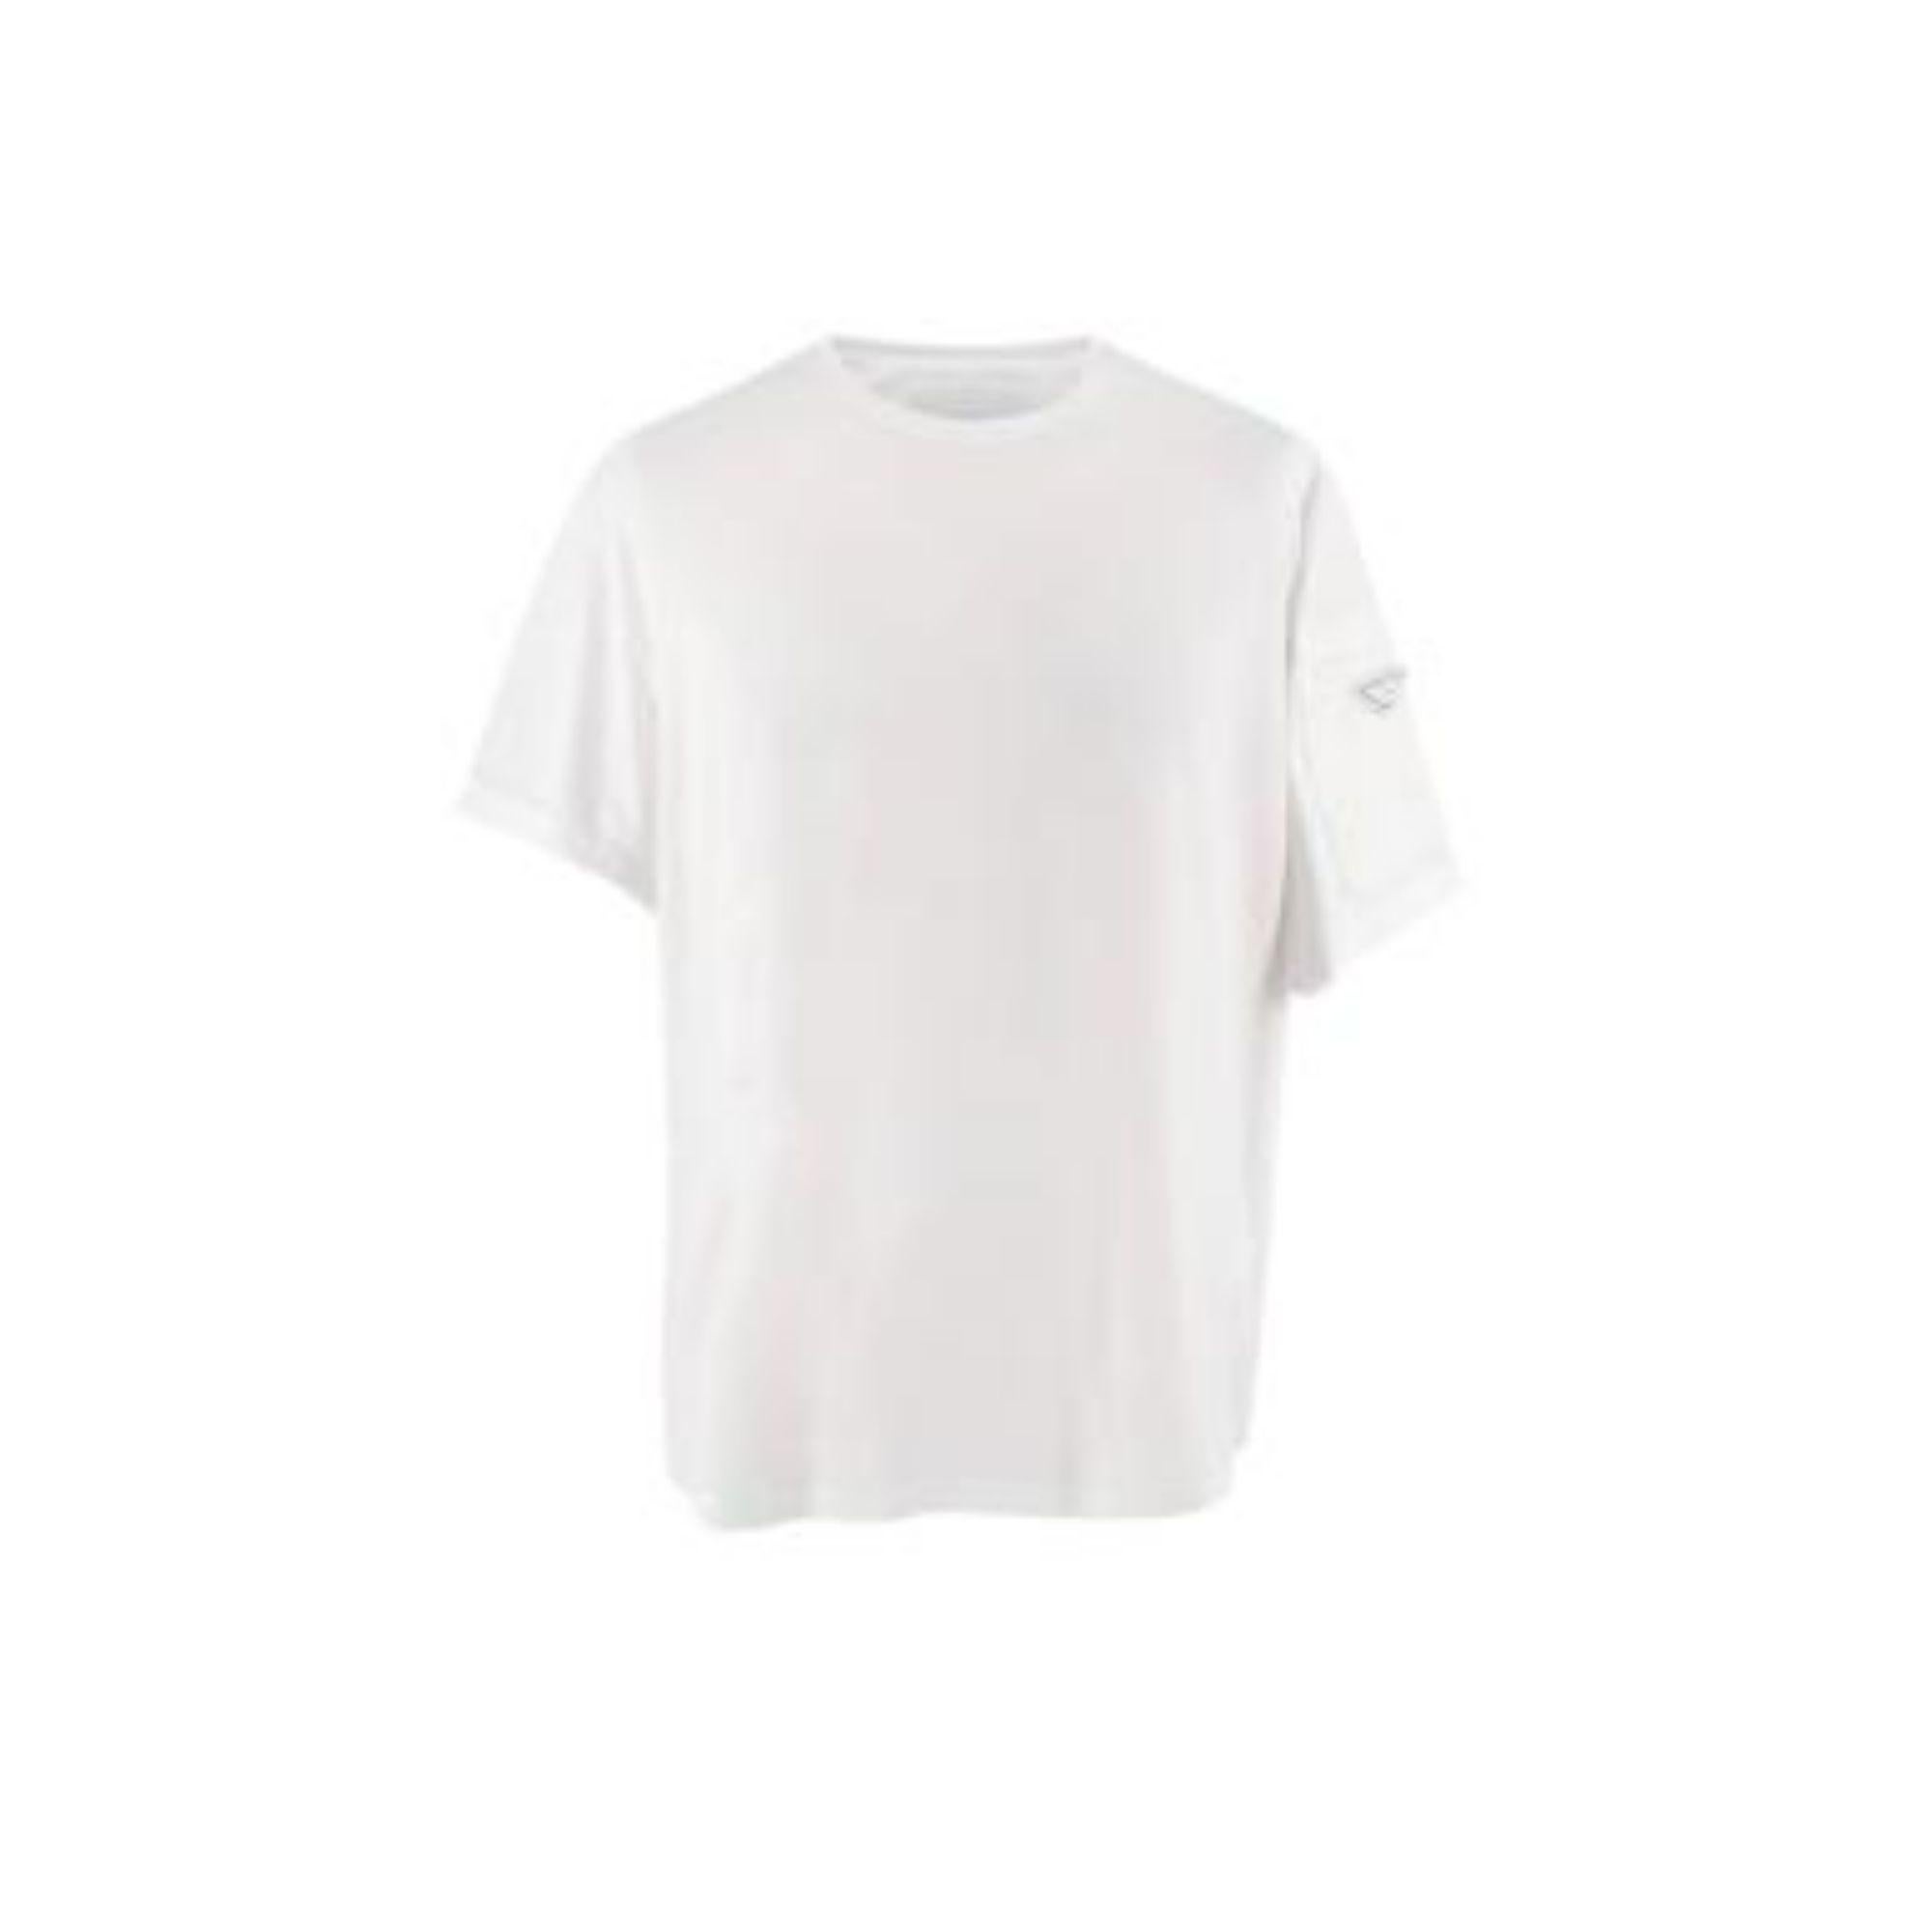 Prada White Cotton T-shirt with Nylon Pocket

- Short sleeved
- Standard t-shirt
- Pocket detailing on sleeve
- Signature triangular plaque on pocket
- Silver-toned hardware
- Panel detailing on side

Material
92% Cotton, 2% Elastane

Made in